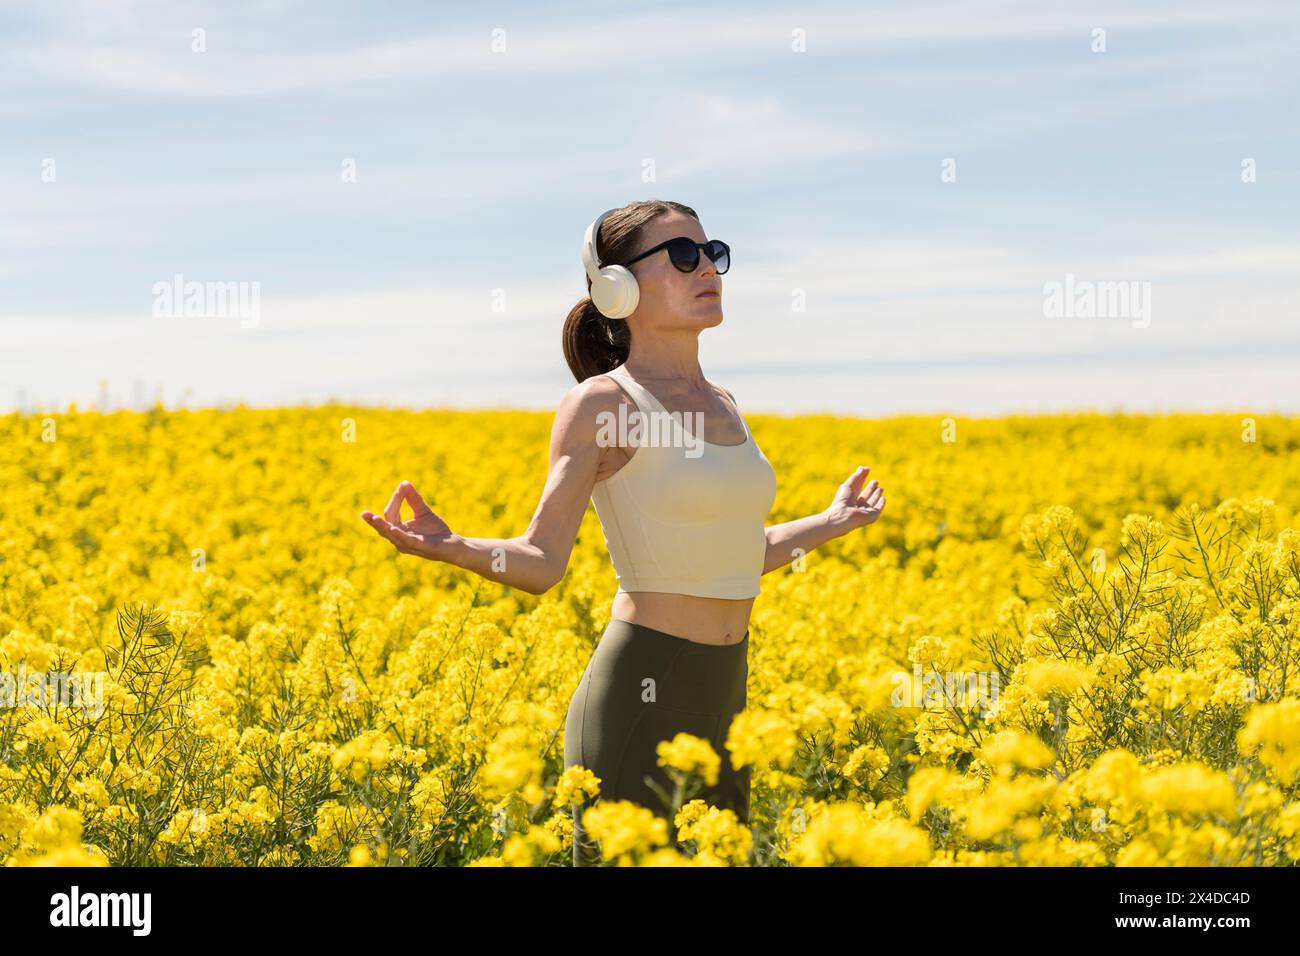 Sporty woman enjoying sunshine in a yellow field, medititating and getting away from it all wearing headphones. Stock Photo